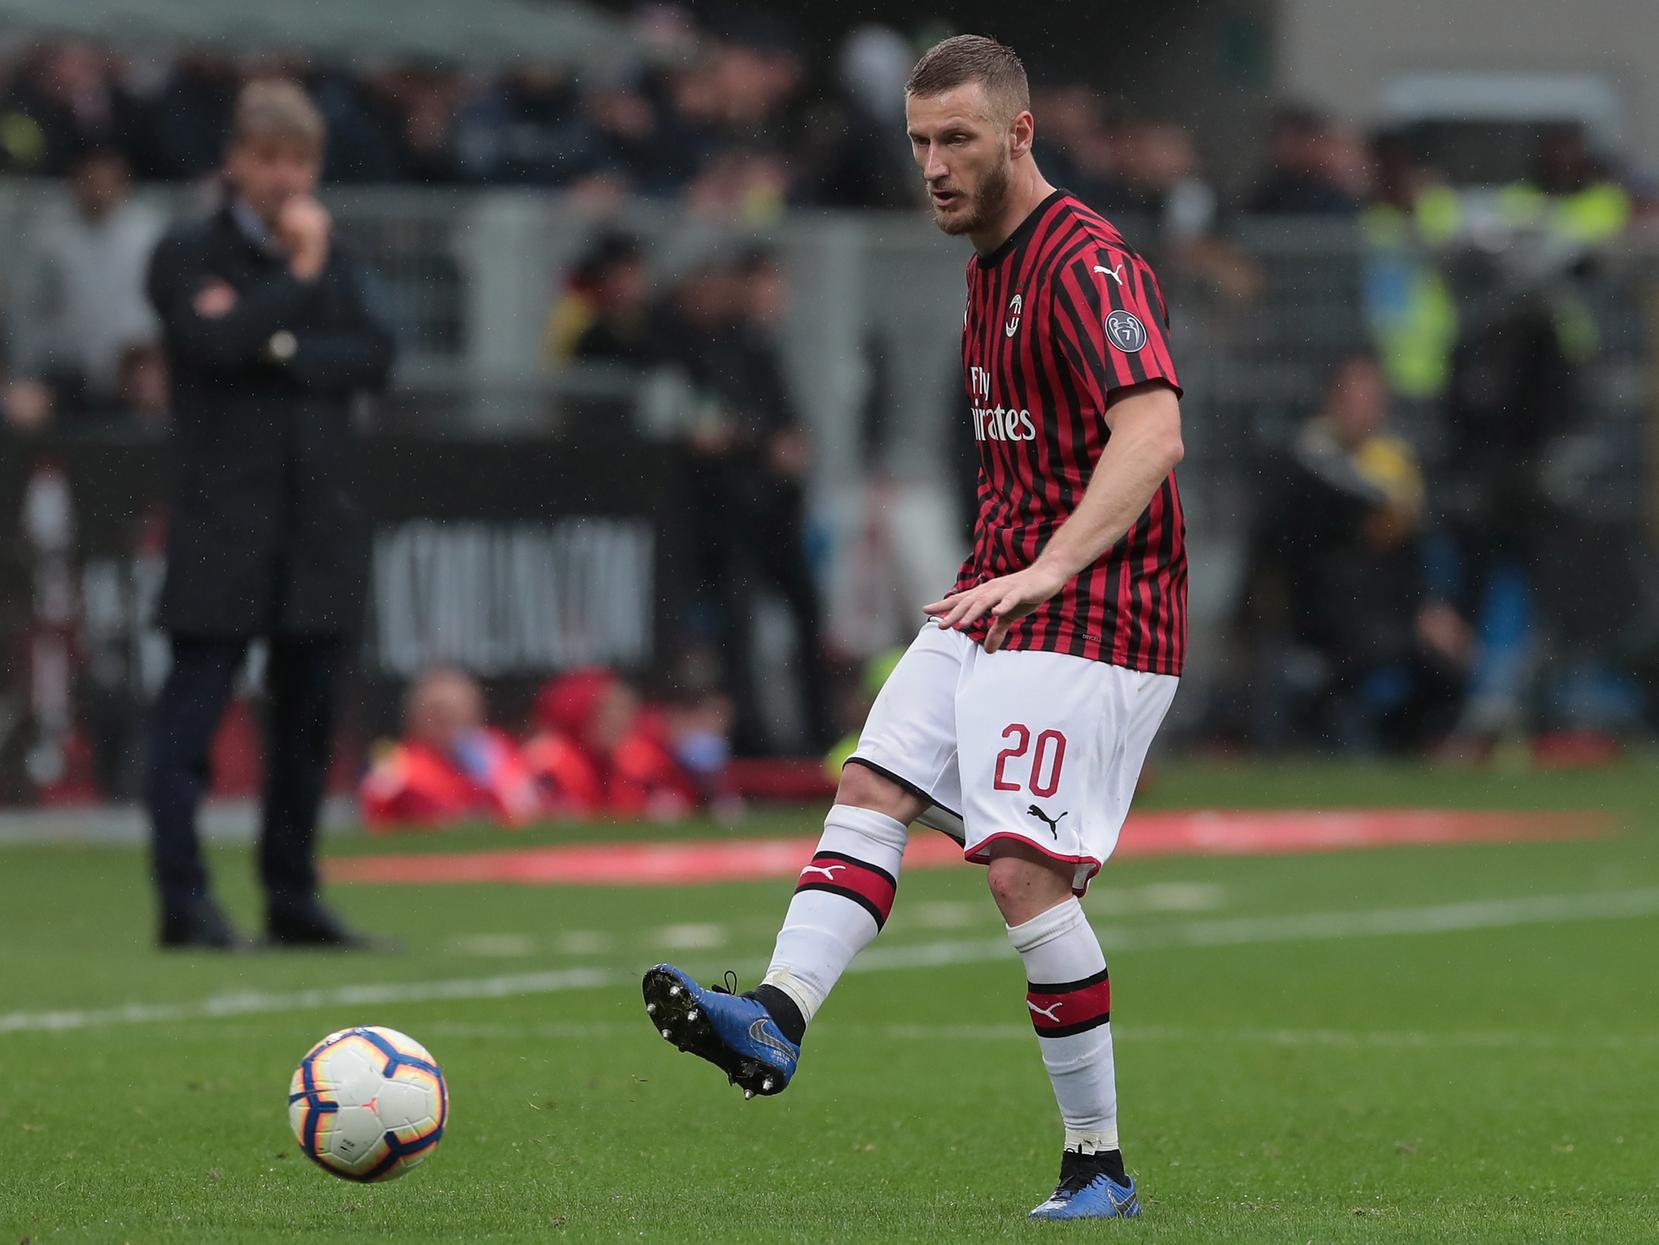 A 22-cap Italy International, the 33-year-old right back has spent most of his career competing at the top of Serie A with giants AC Milan.